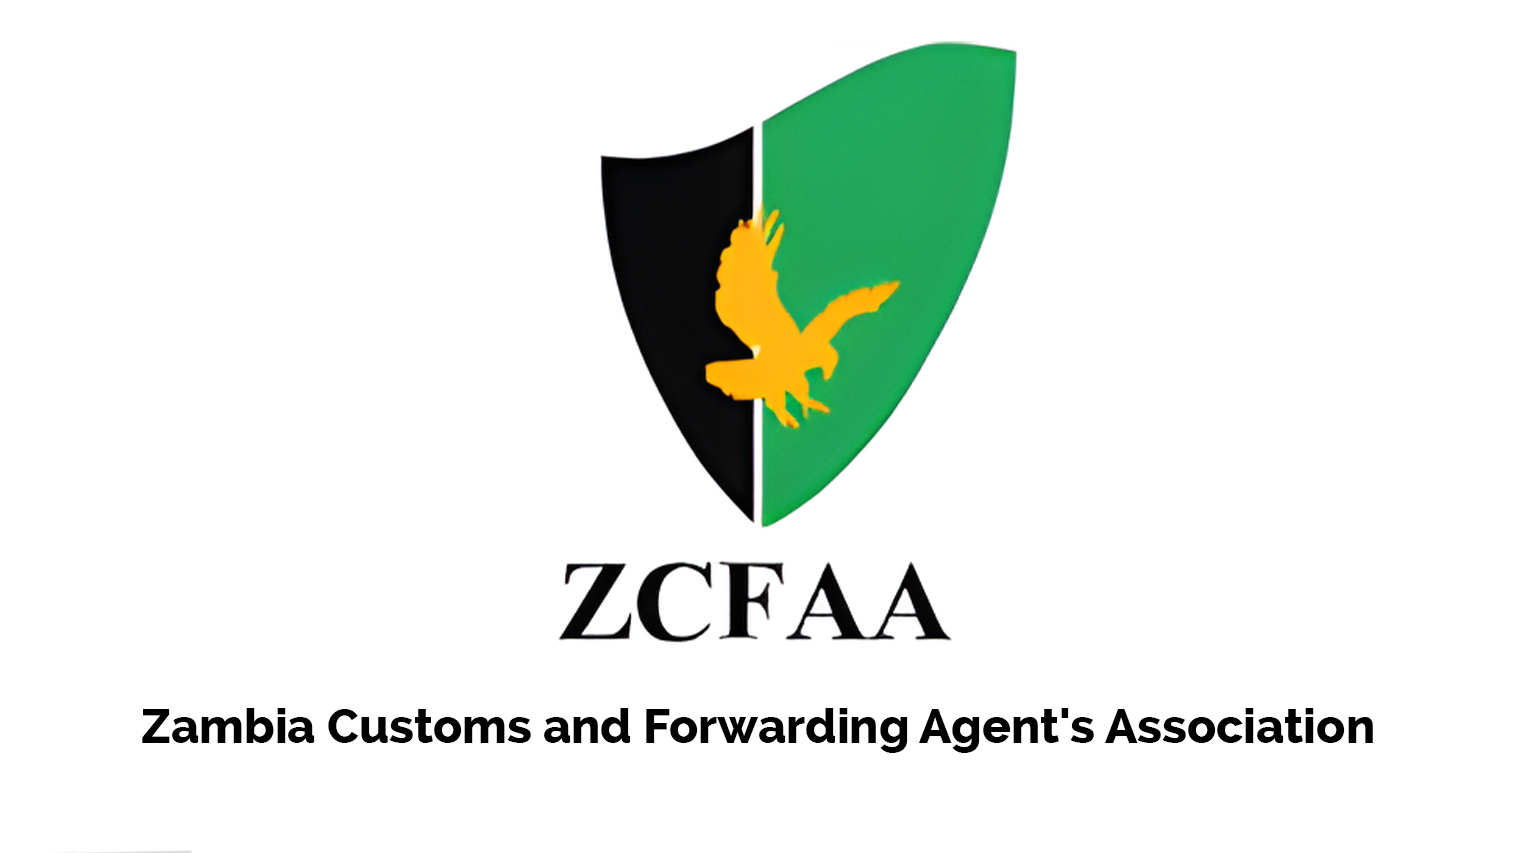 Zambia Customs and Forwarding Agent's Association